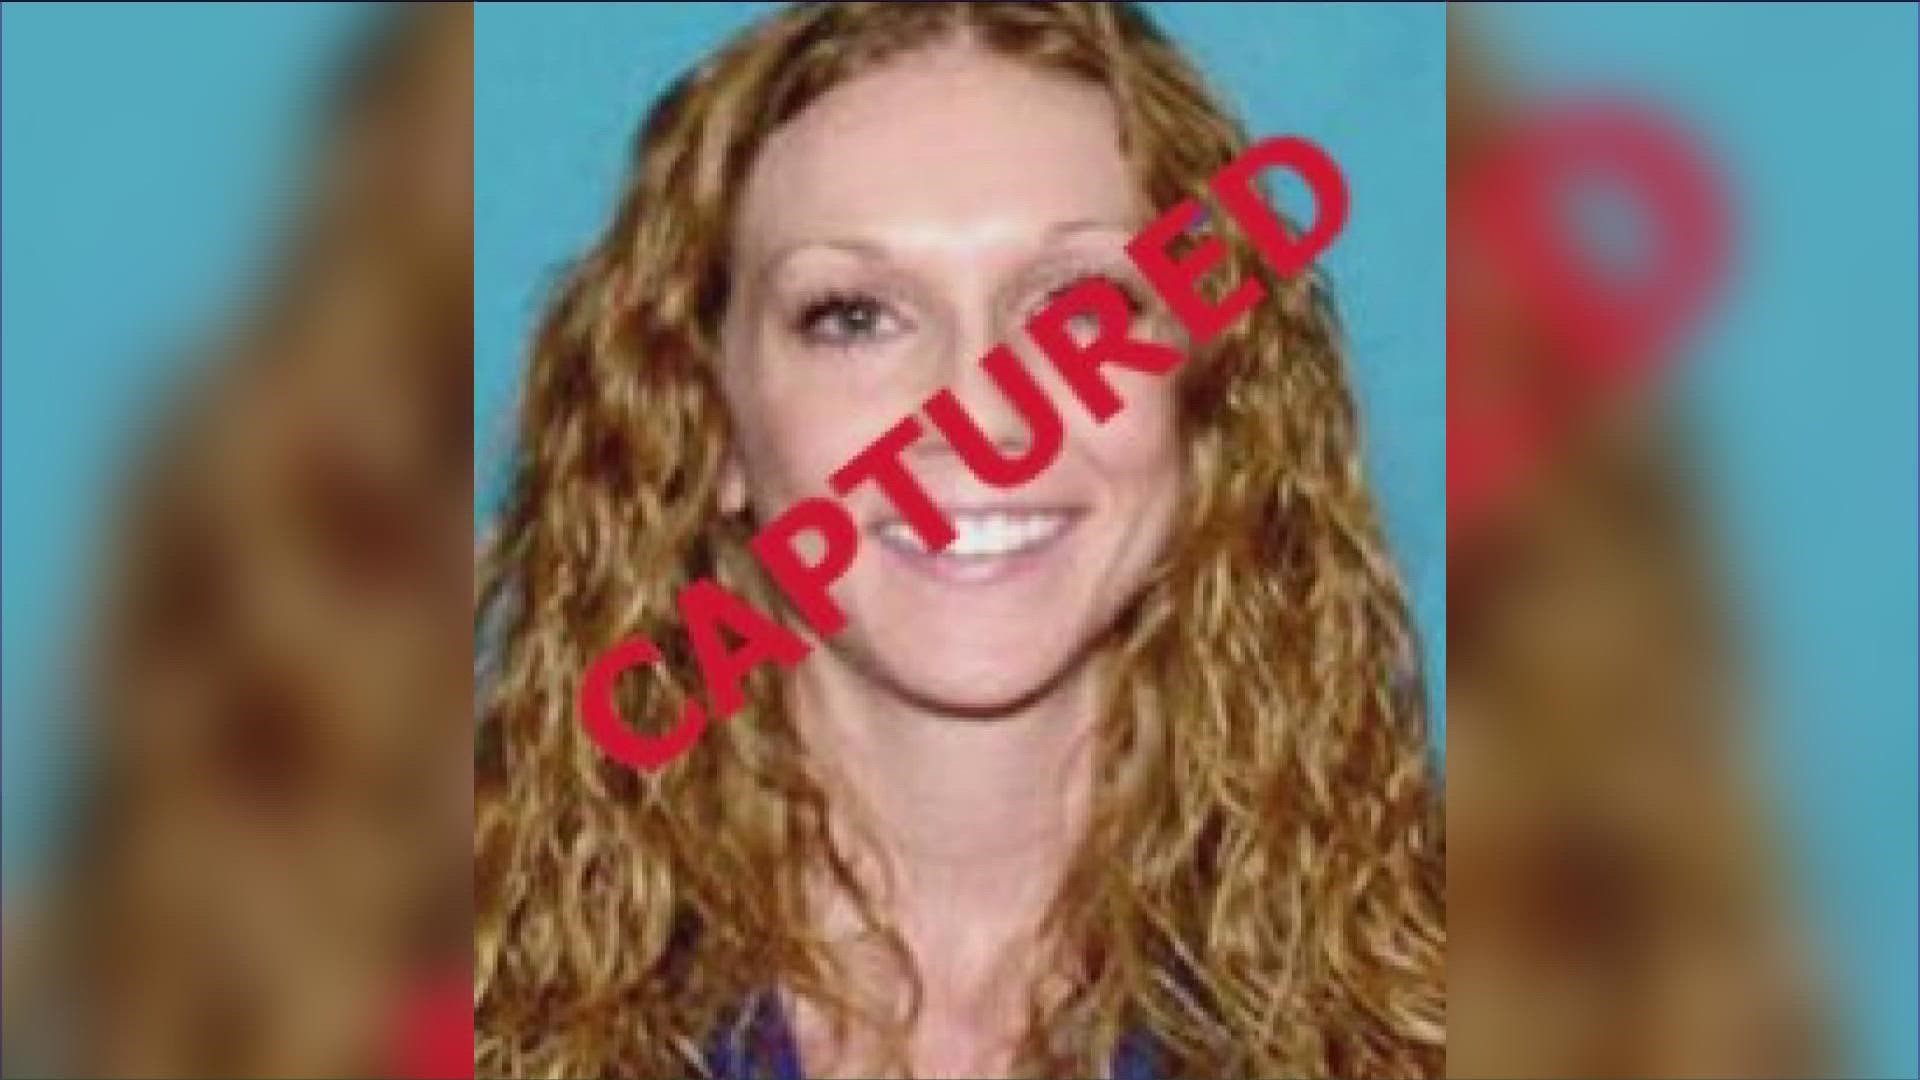 Authorities said Kaitlin Armstrong used a fraudulent document to get from New Jersey to Costa Rica.